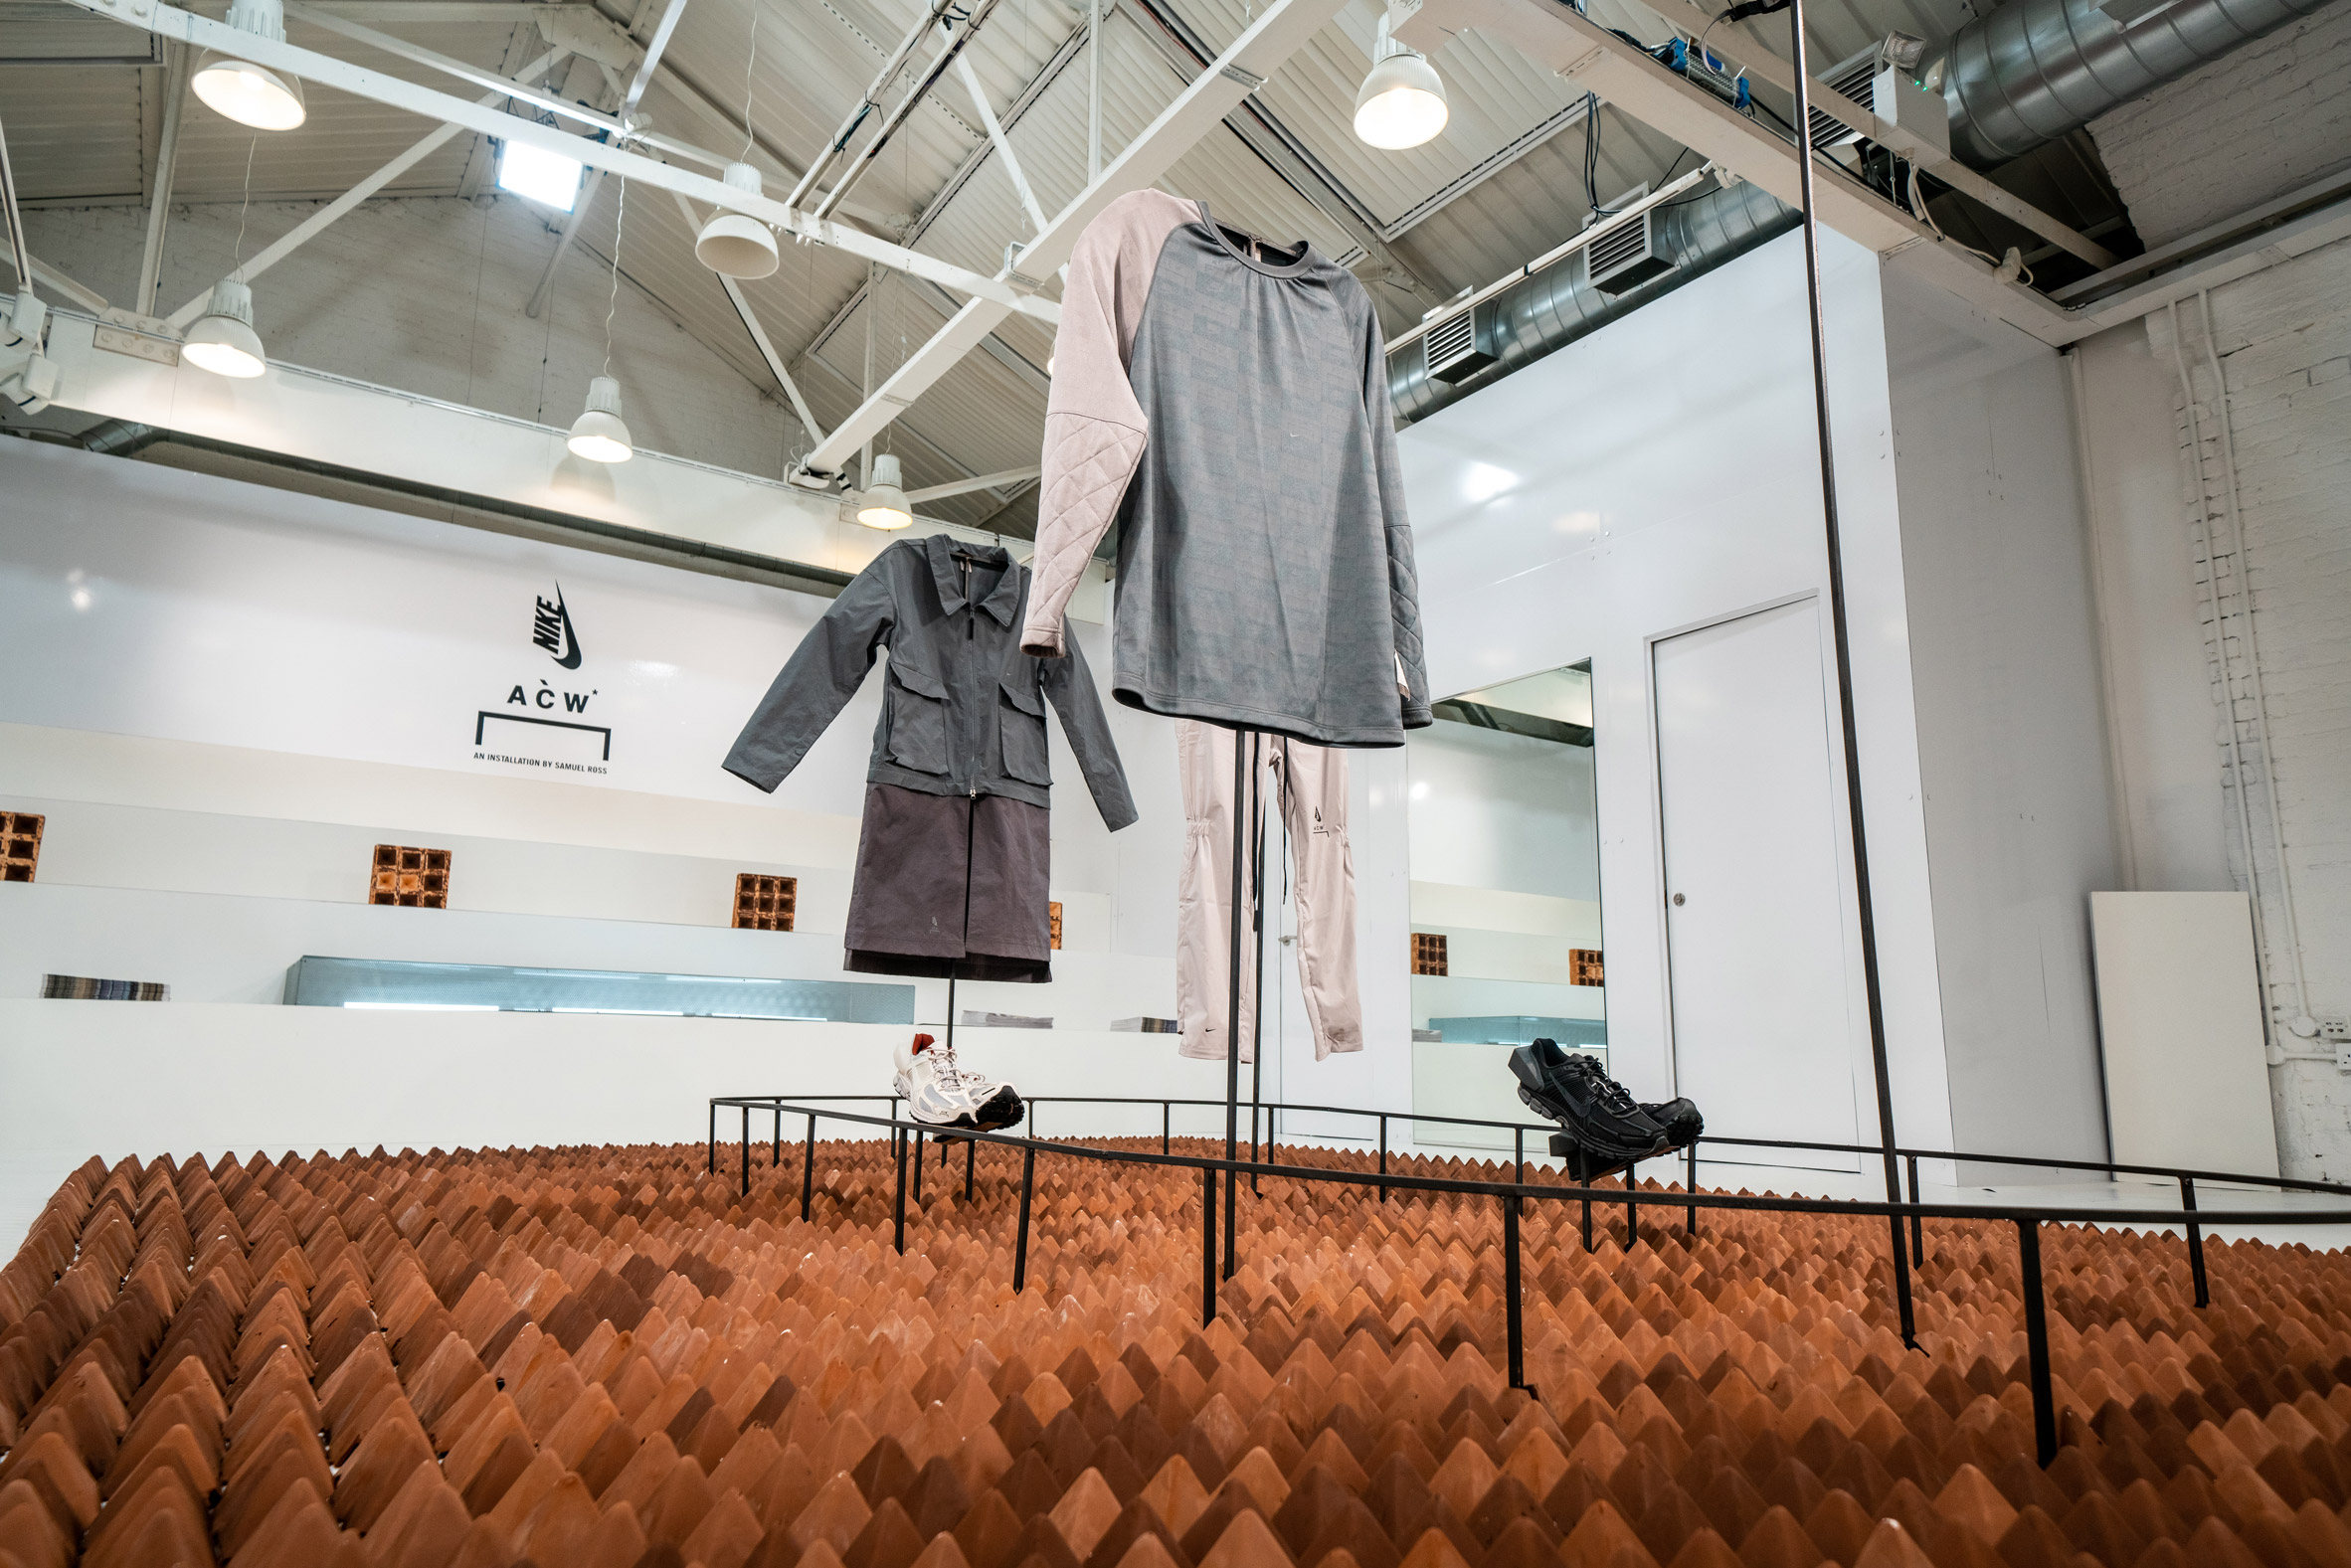 Architectural Association creates terracotta floor show for Samuel Ross' Nike collection